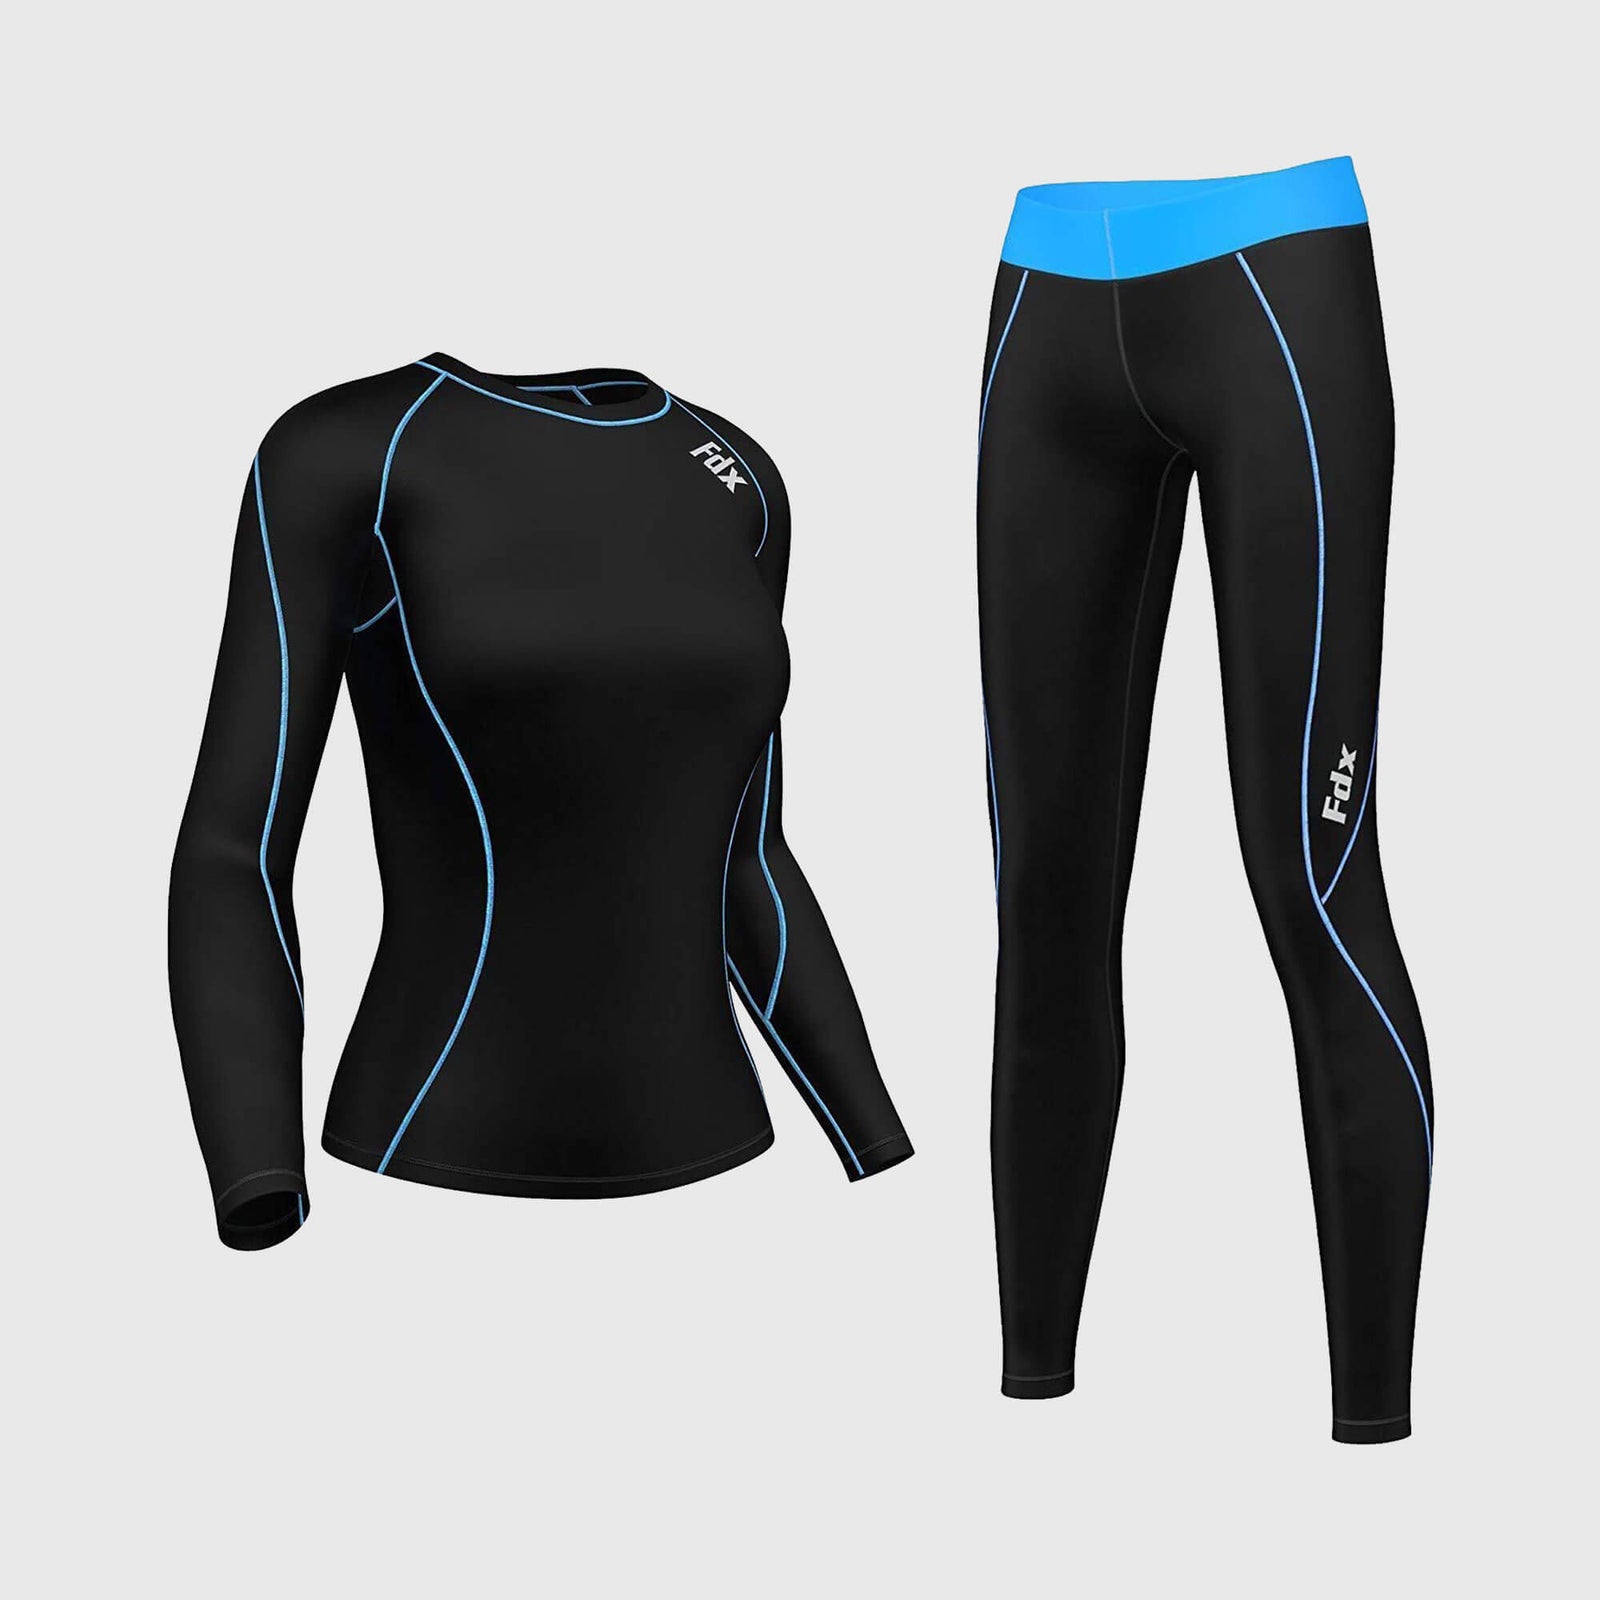 Ladies Compression Suit Thermal Base Layer Tights Shirt Under Long